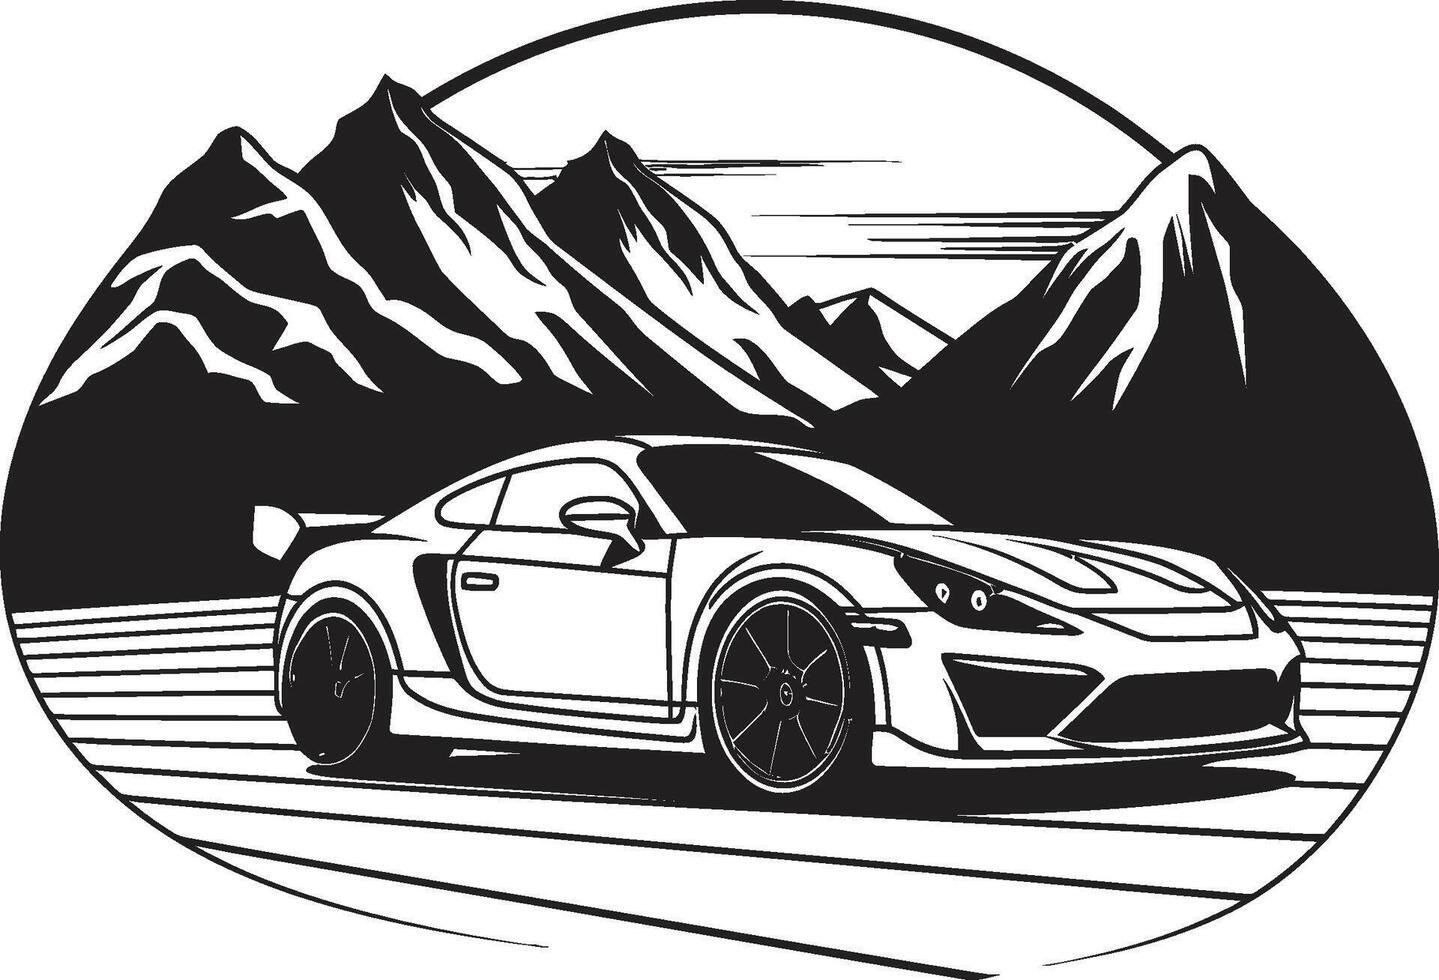 Alpine Awe Black Icon Signifying a Sports Cars Mastery on Serpentine Mountain Roads Ridge Rally Sleek Black Logo Design Depicting a Sports Cars Triumph on Mountain Routes in Vector